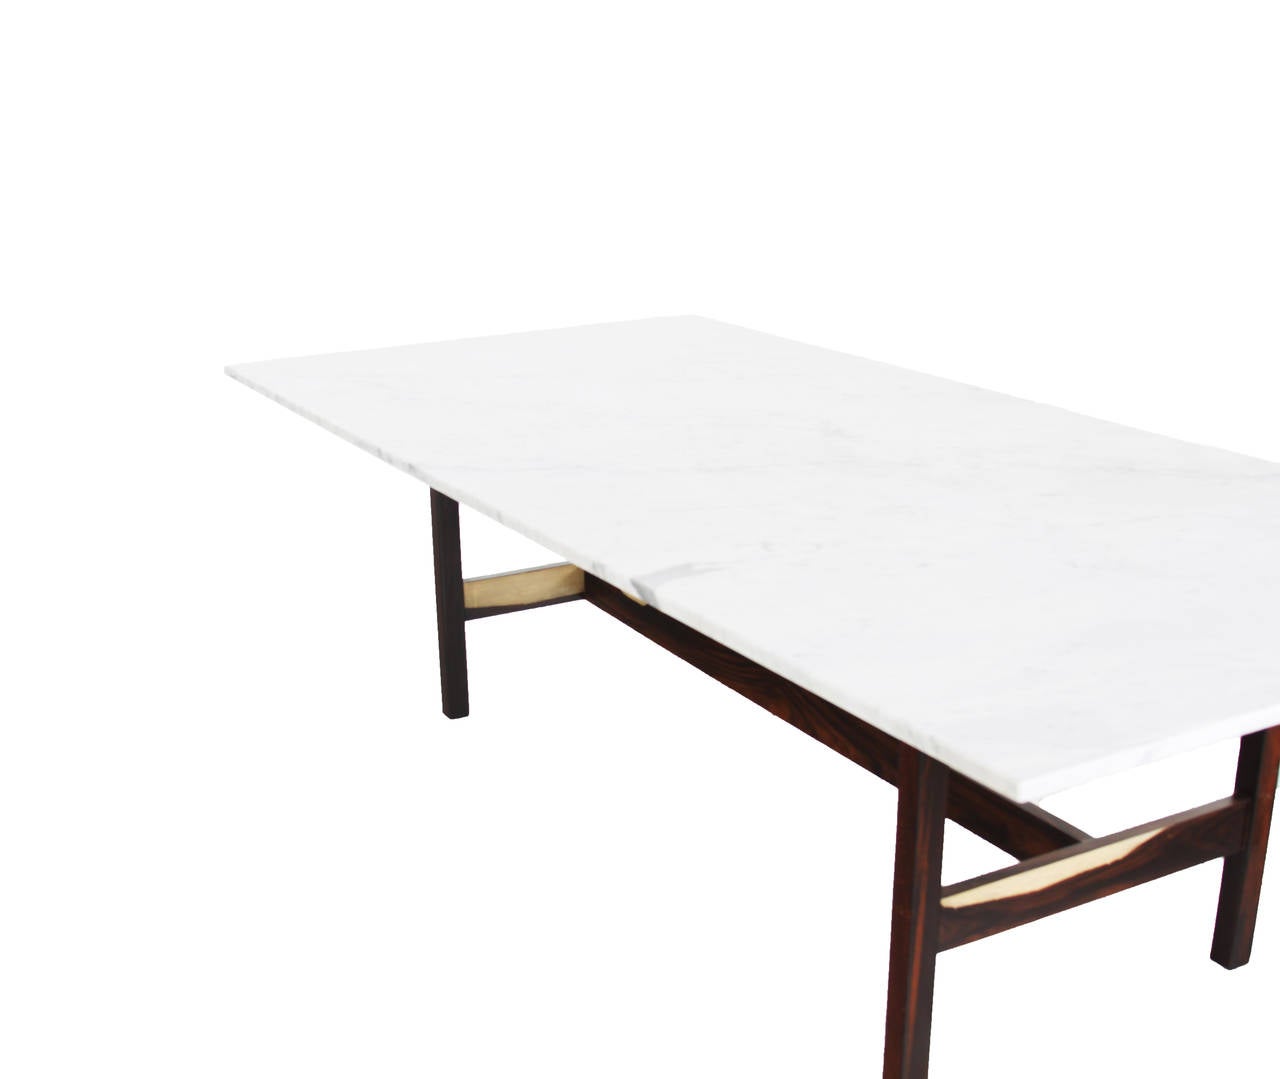 Brazilian Rosewood Dining Table with Carrara Marble Top 1